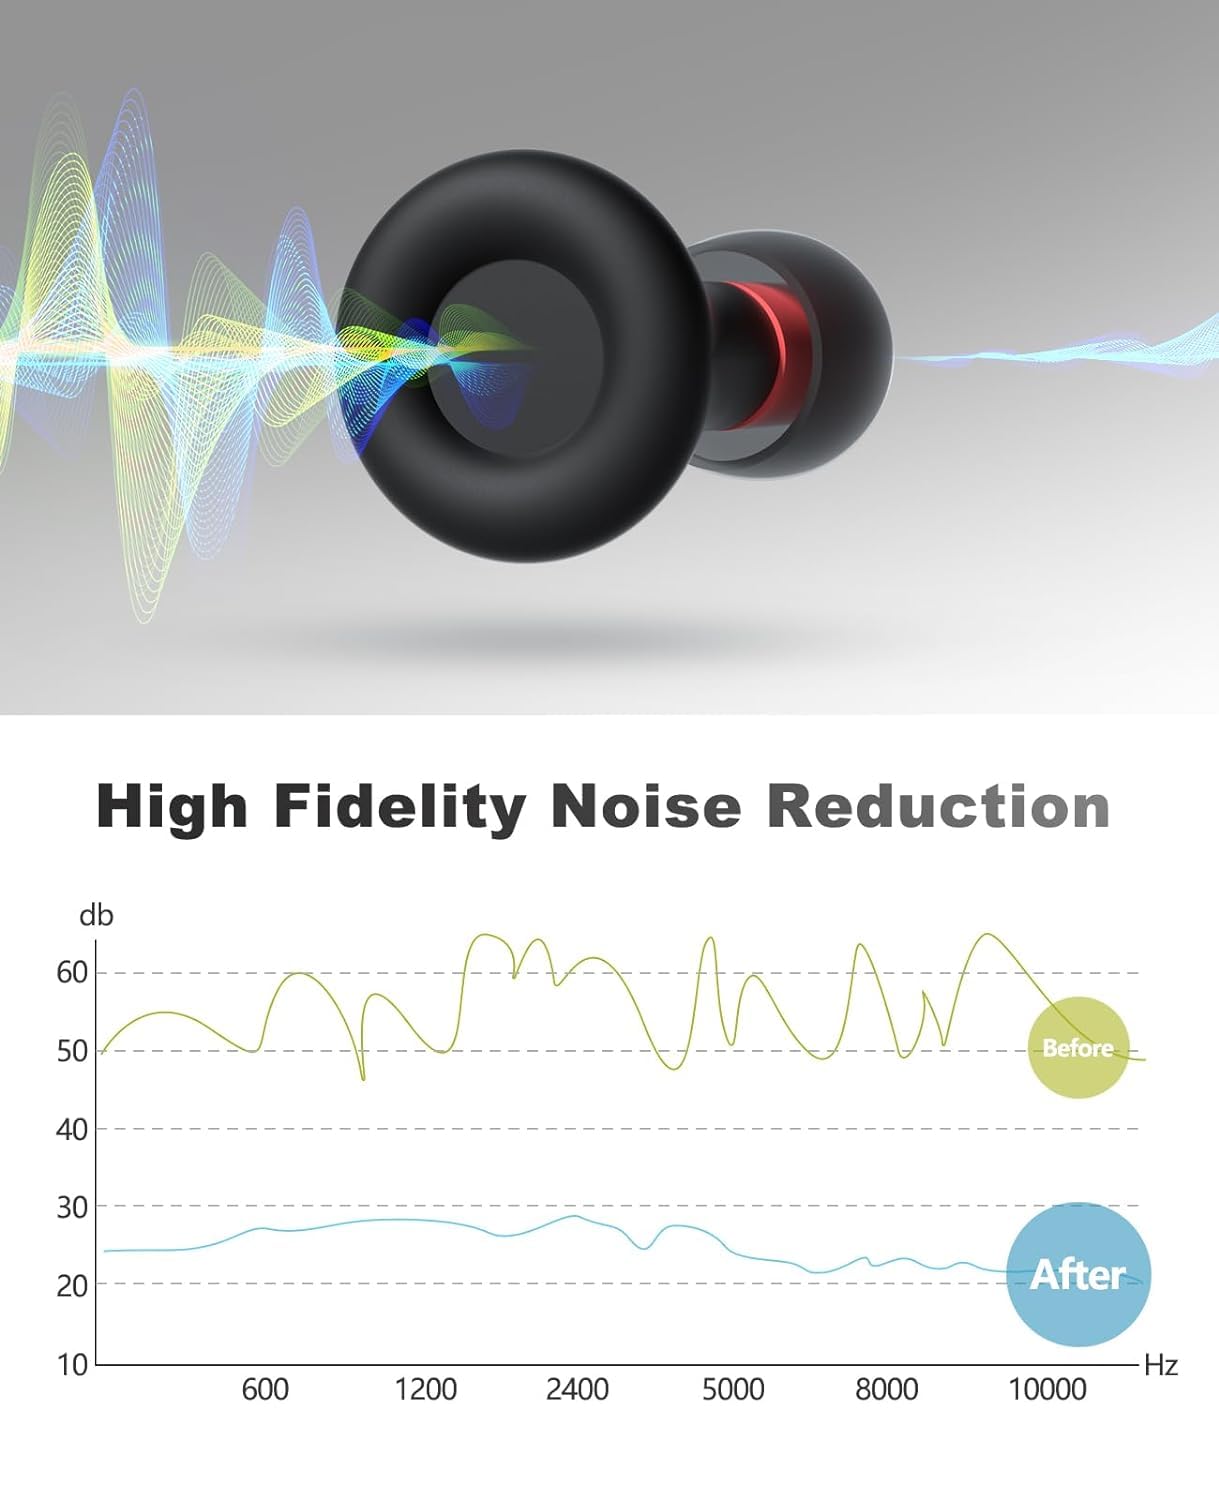 Ear Plugs for Sleeping Noise Reduction Reusable, Concerts, Focus, Travel, Work, High Fidelity – 7 Pair Eartips – Flexible Soft-Touch – NRR of 24 and 27 dB Noise Cancelling Black Red